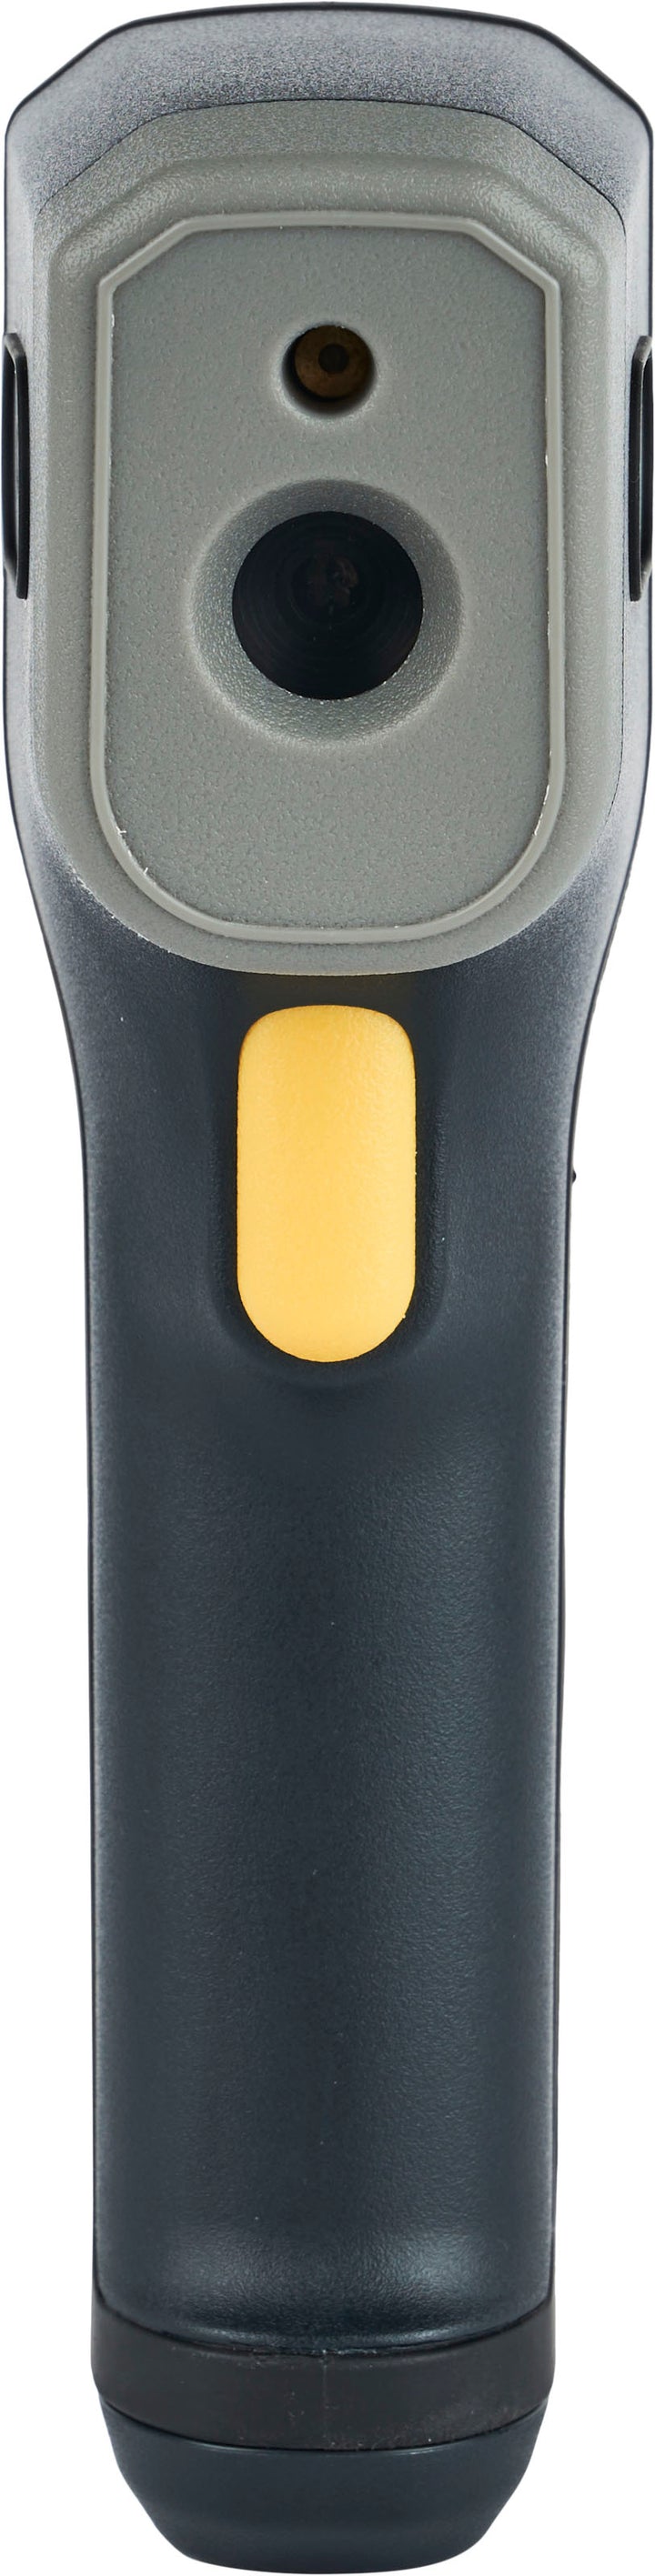 Ooni - Digital Infrared Thermometer - Black_5